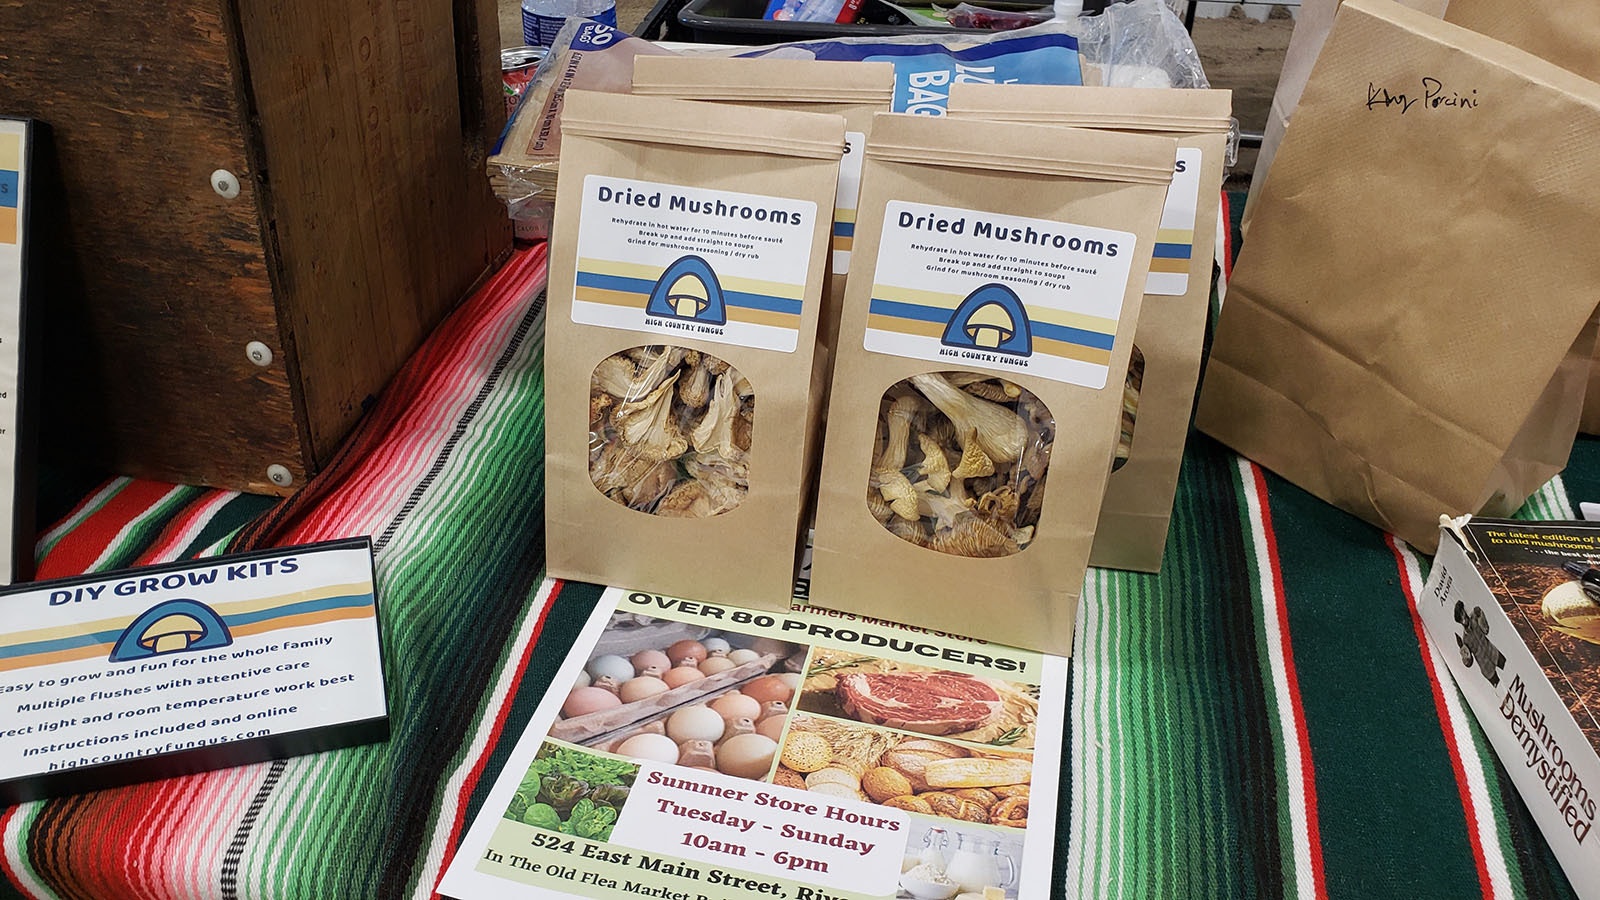 Some of Dan Stewart's dried mushrooms for sale.